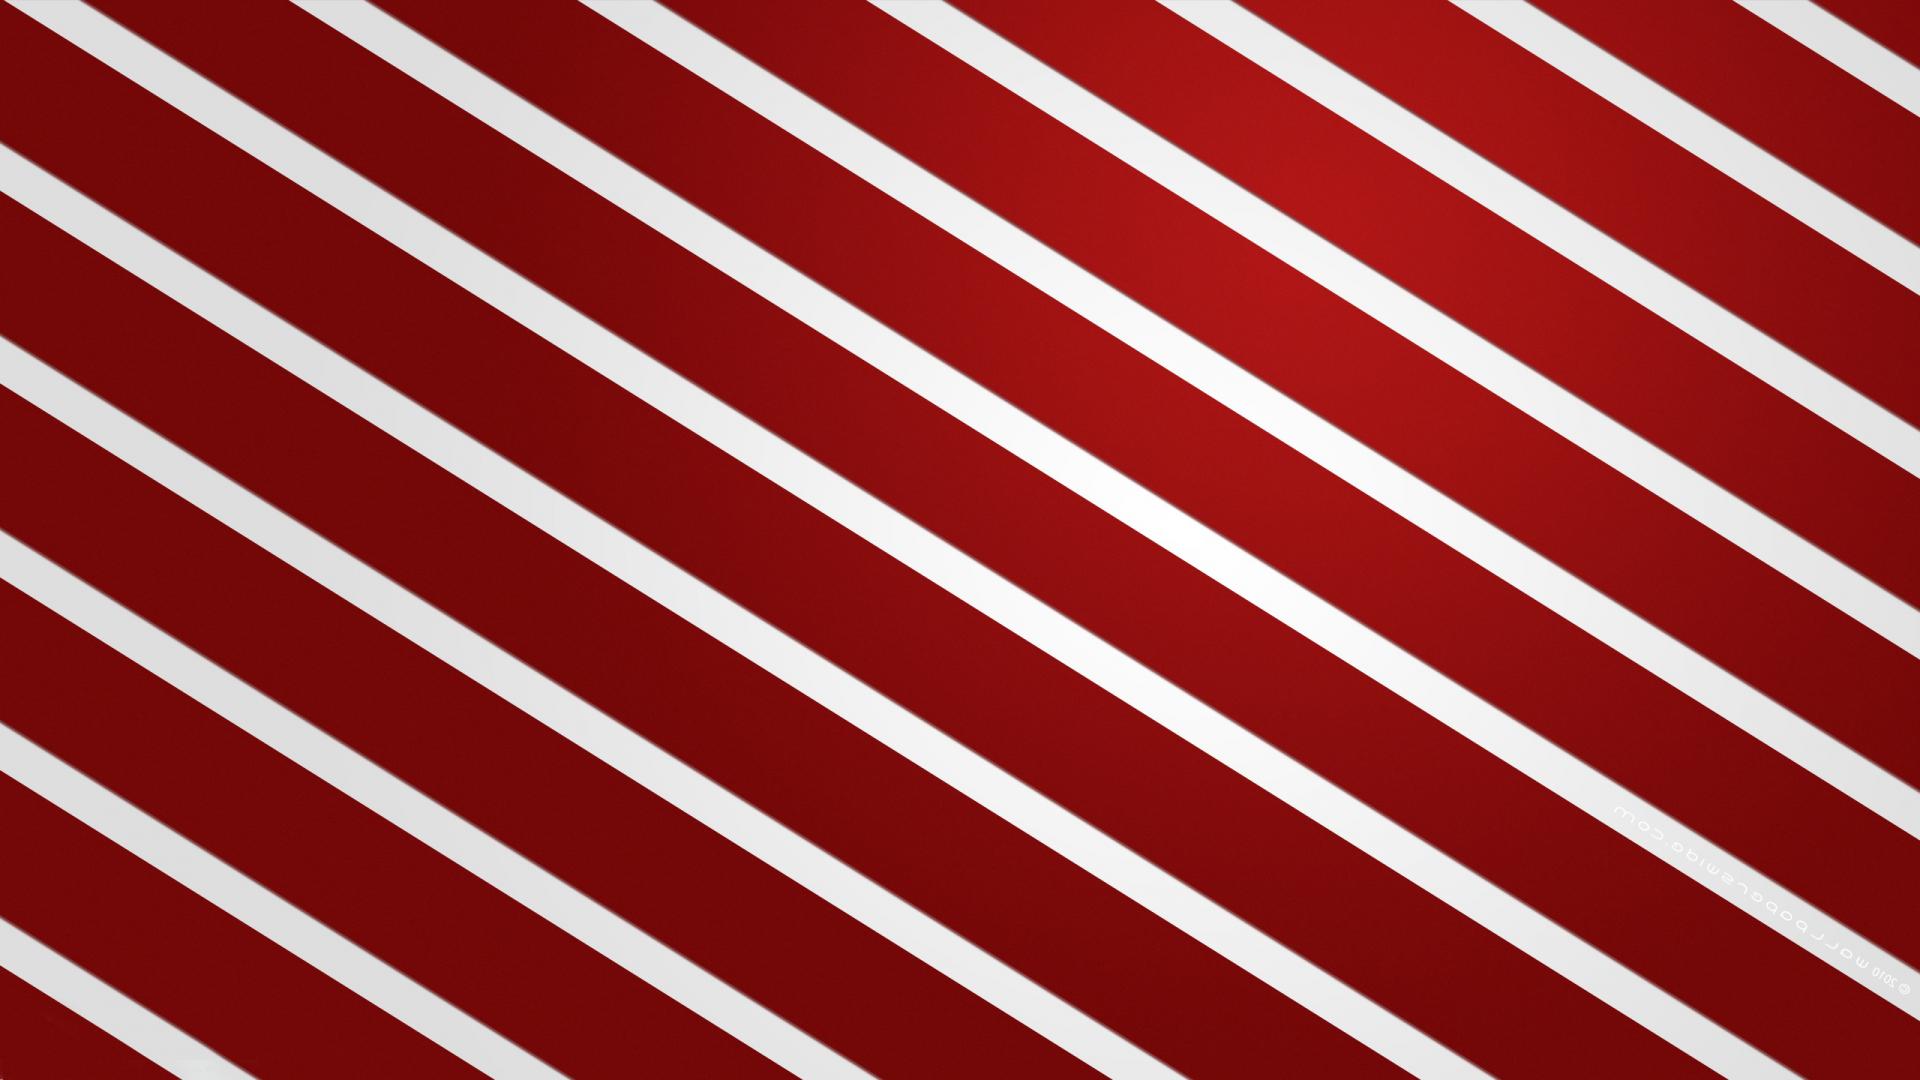 Red Stripe Wallpapers - Wallpaper Cave